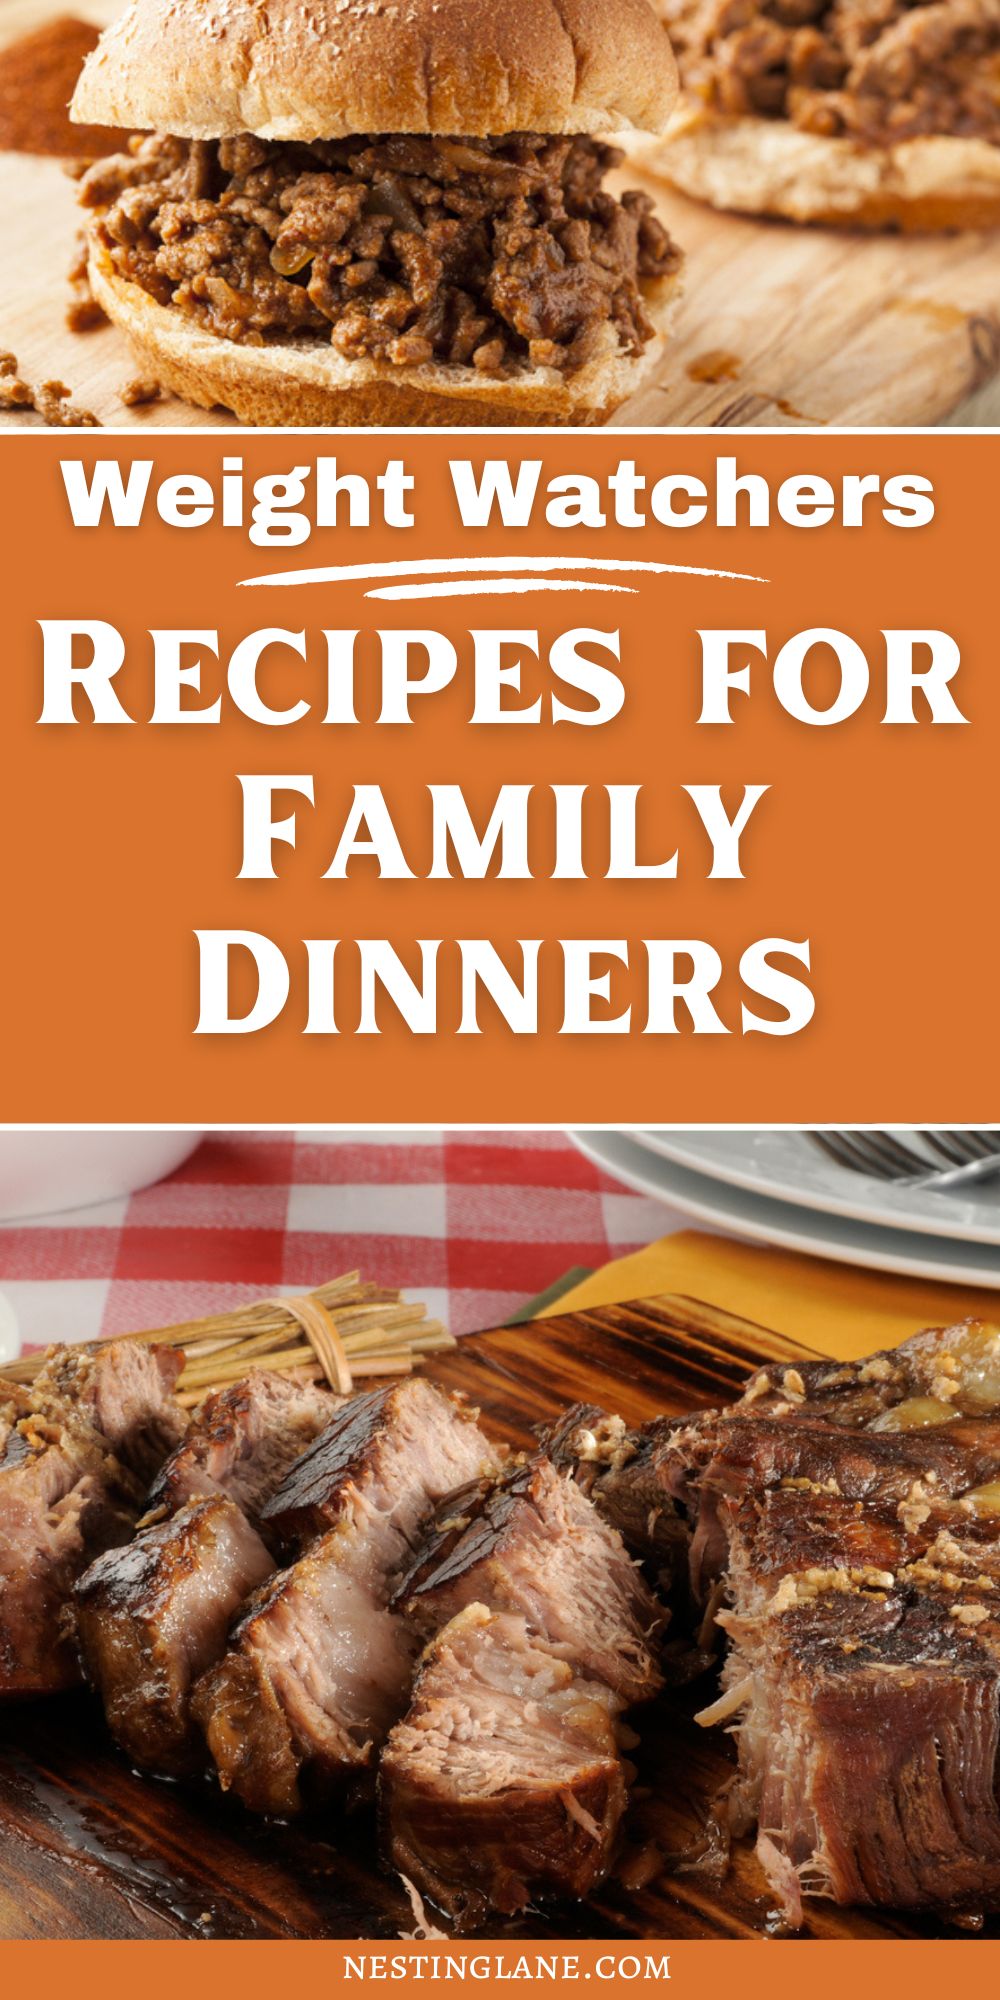 Graphic for Pinterest of Weight Watchers Recipes for Family Dinners.